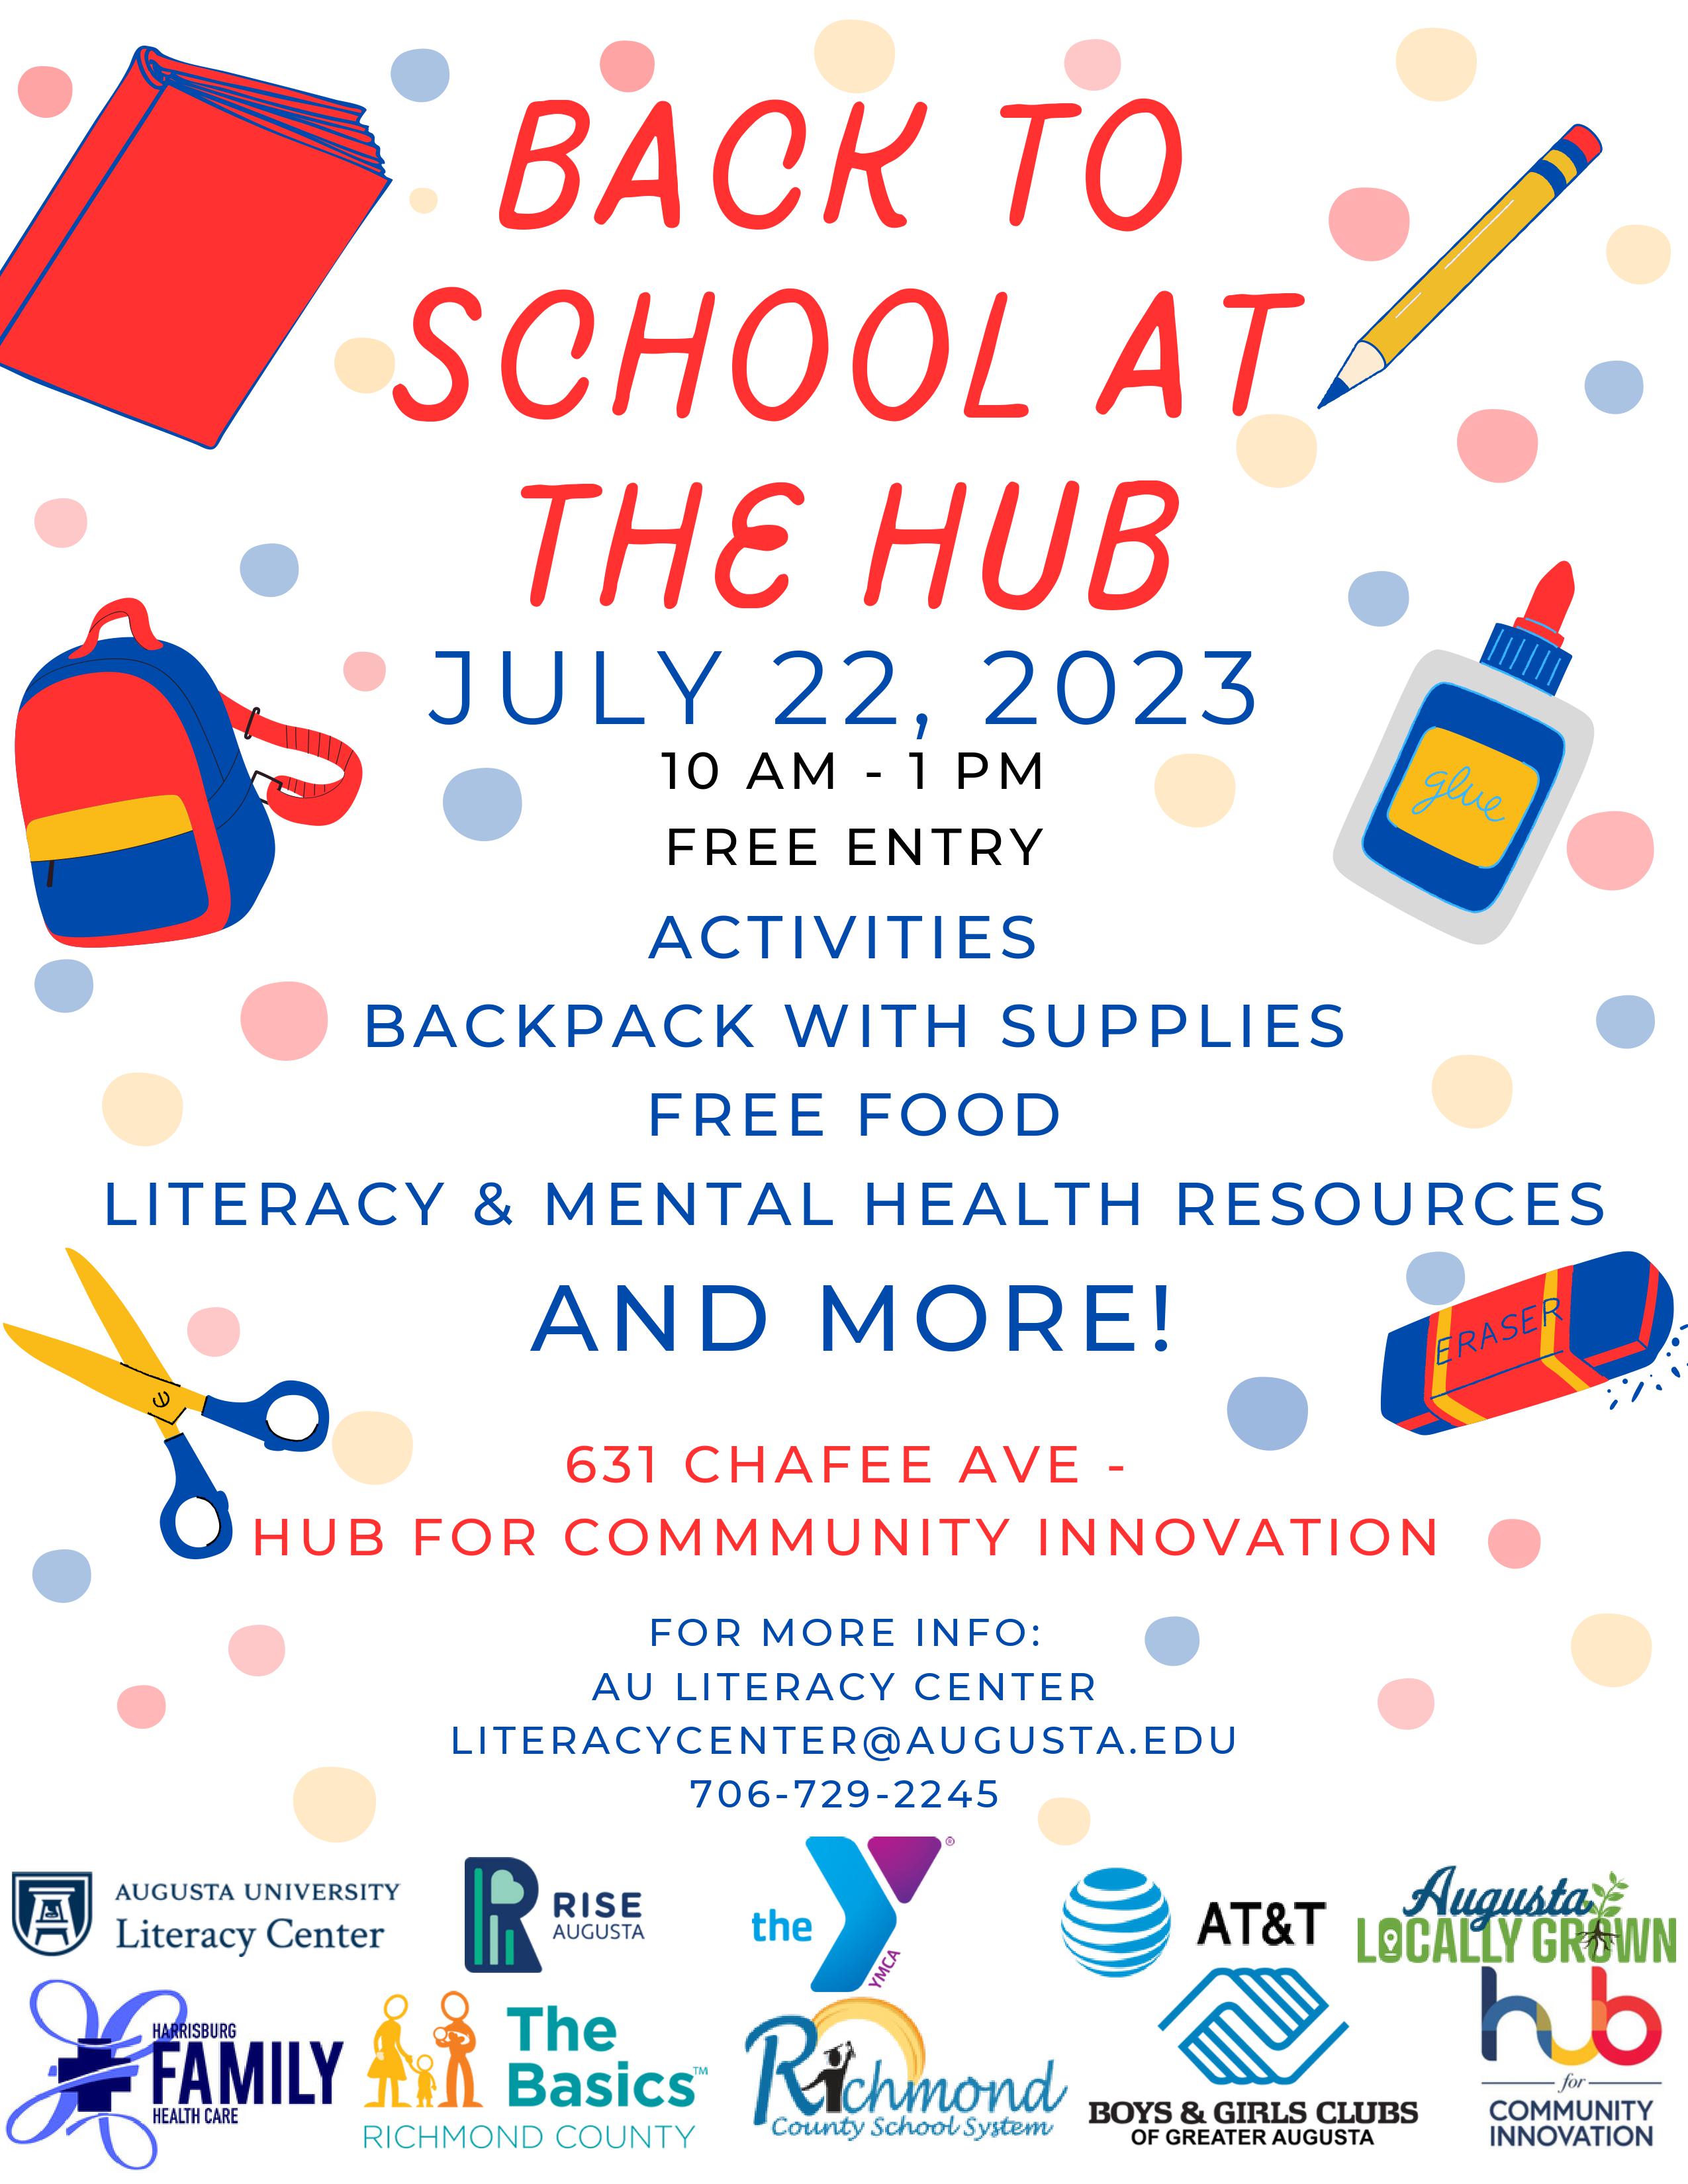 Back to school at the Hub